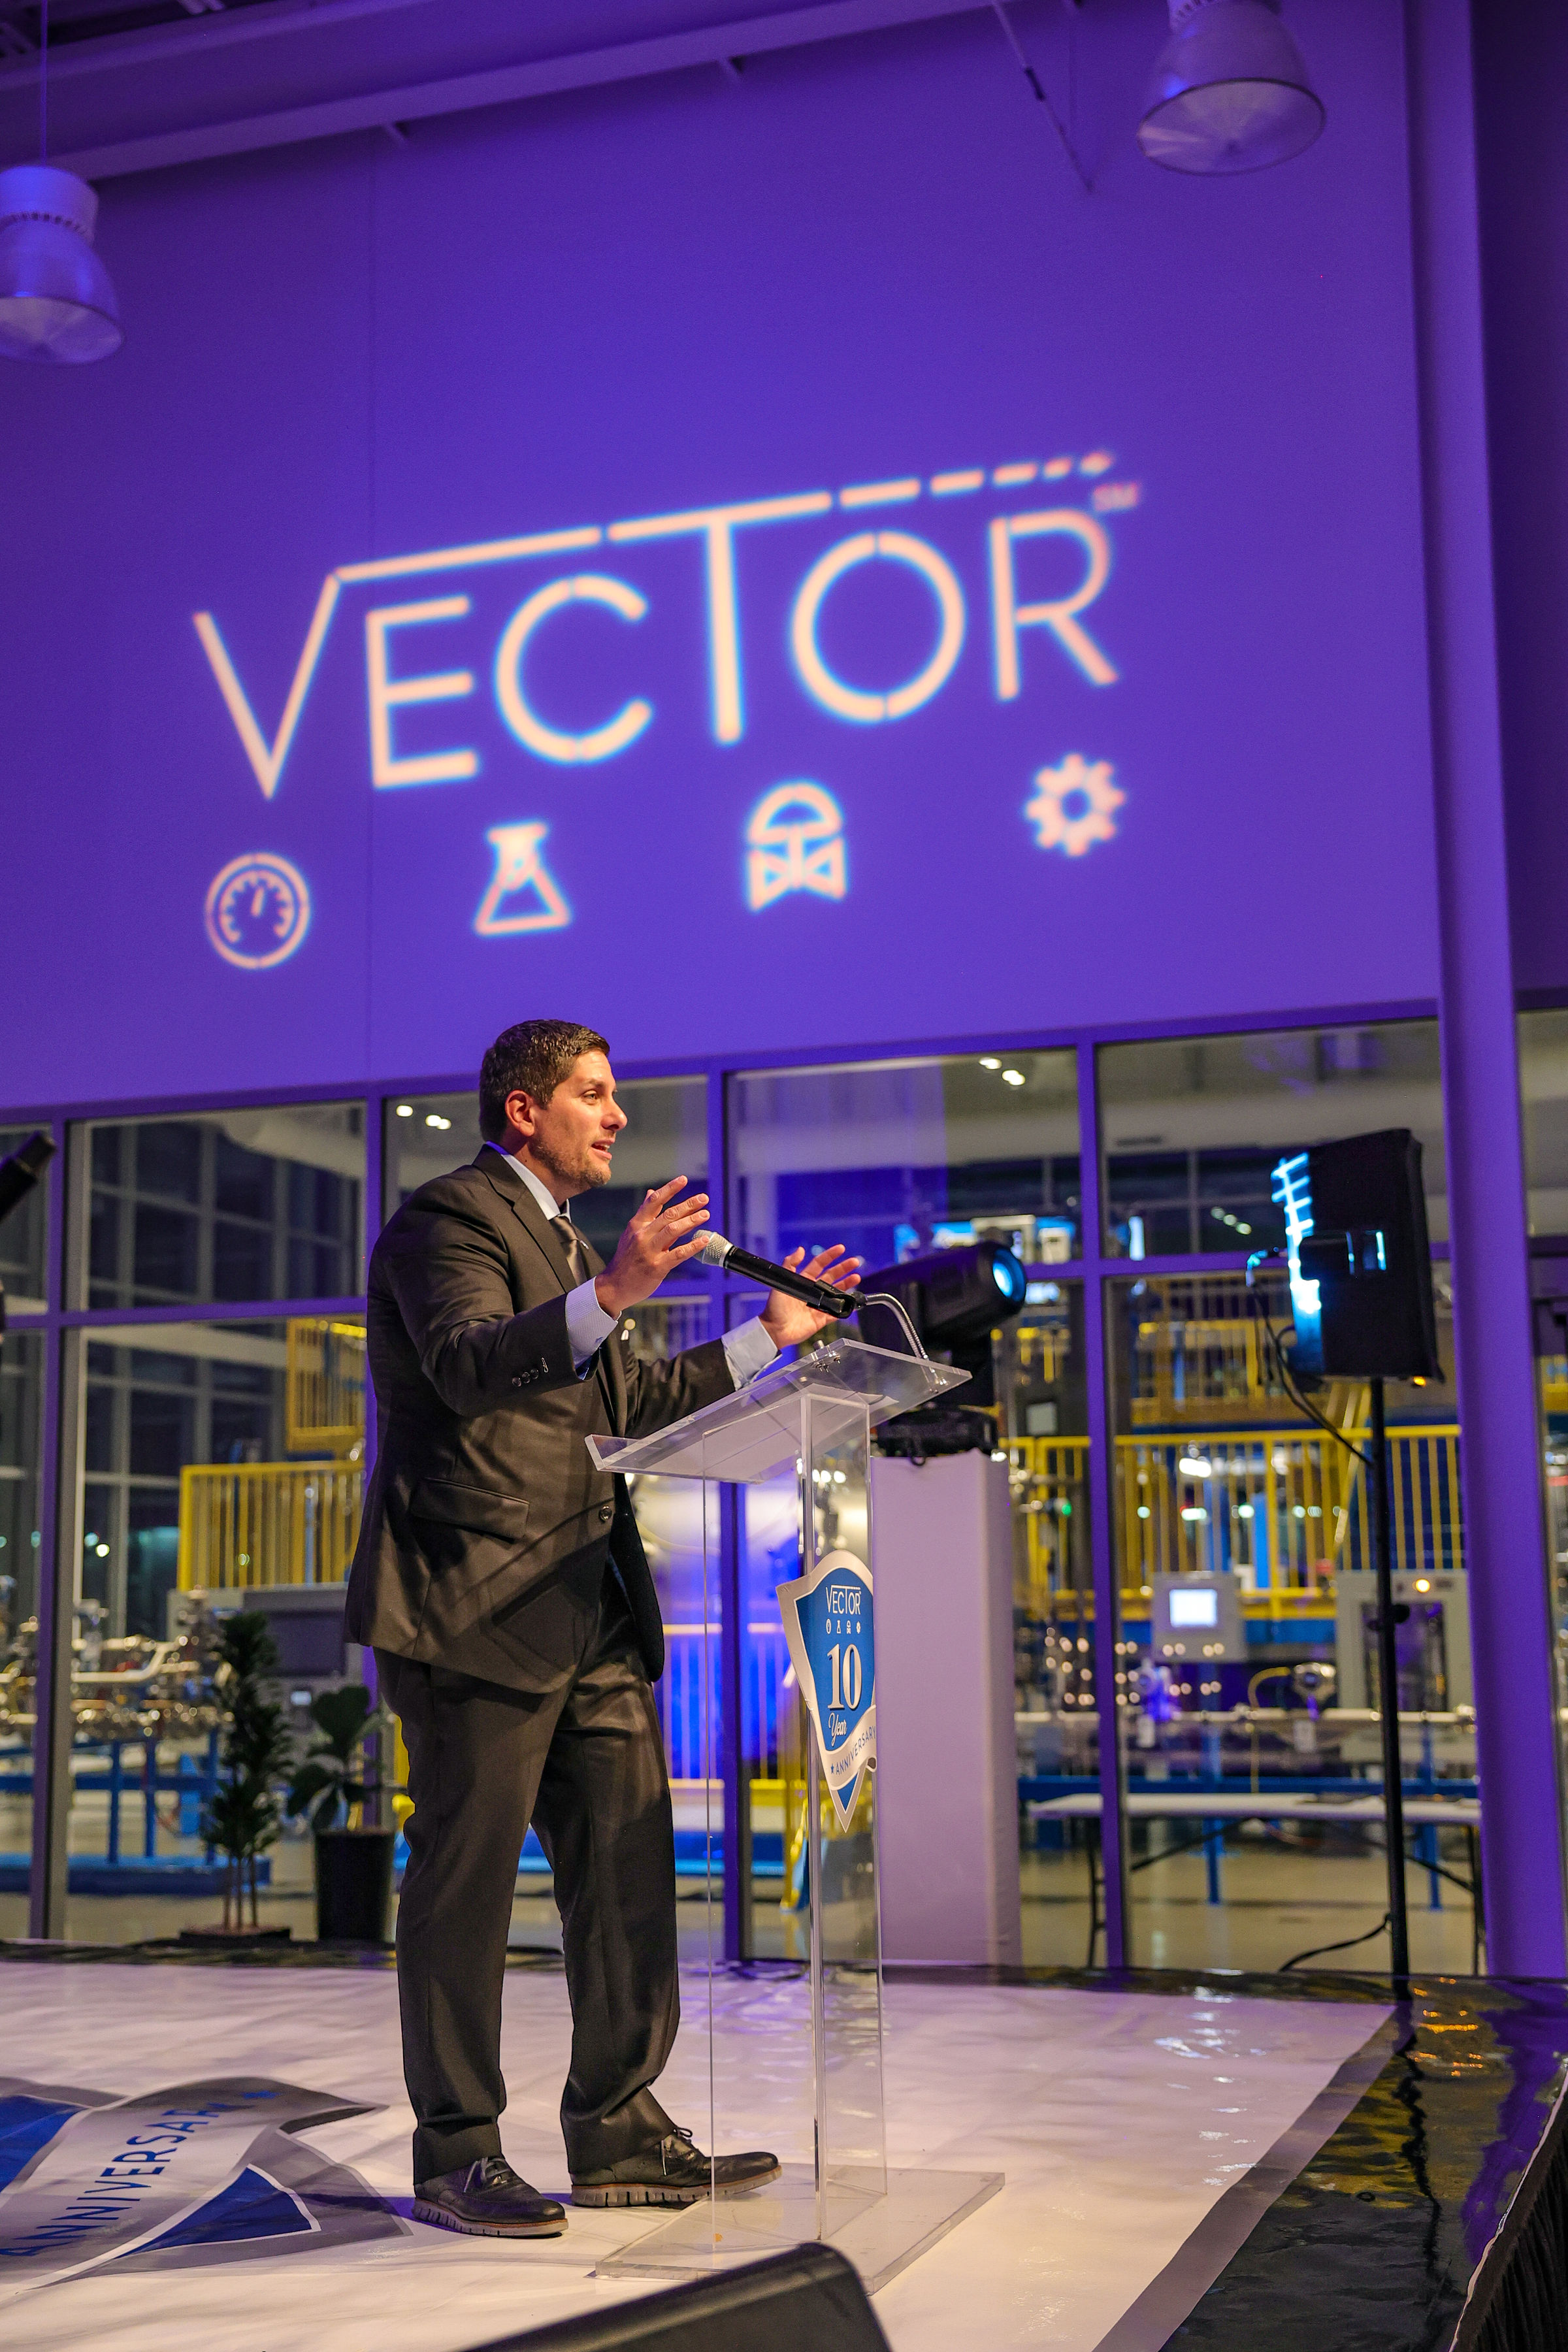 President, Jared Boudreaux welcomes guests to Vector CAG anniversary event.